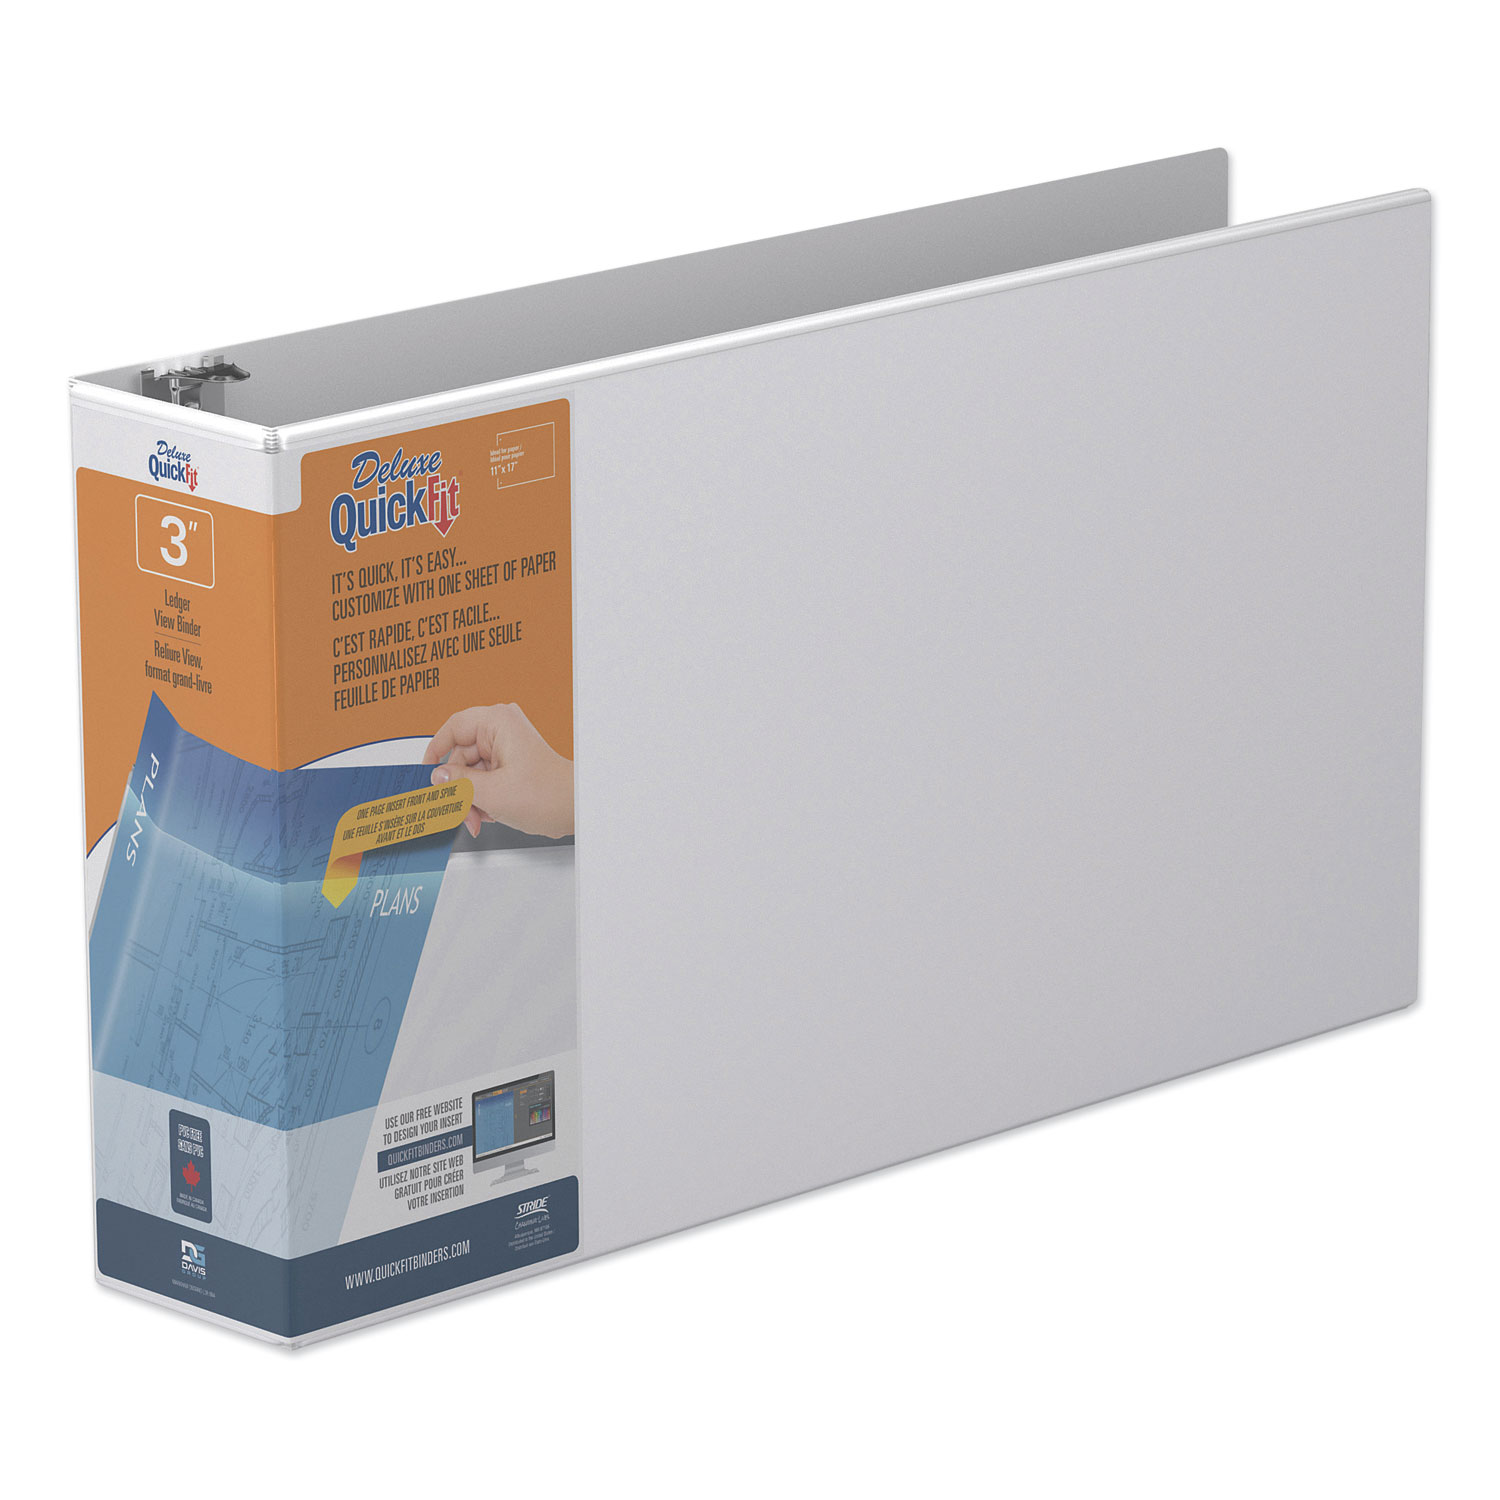  Stride 94050 QuickFit Ledger D-Ring View Binder, 3 Rings, 3 Capacity, 11 x 17, White (STW94050) 